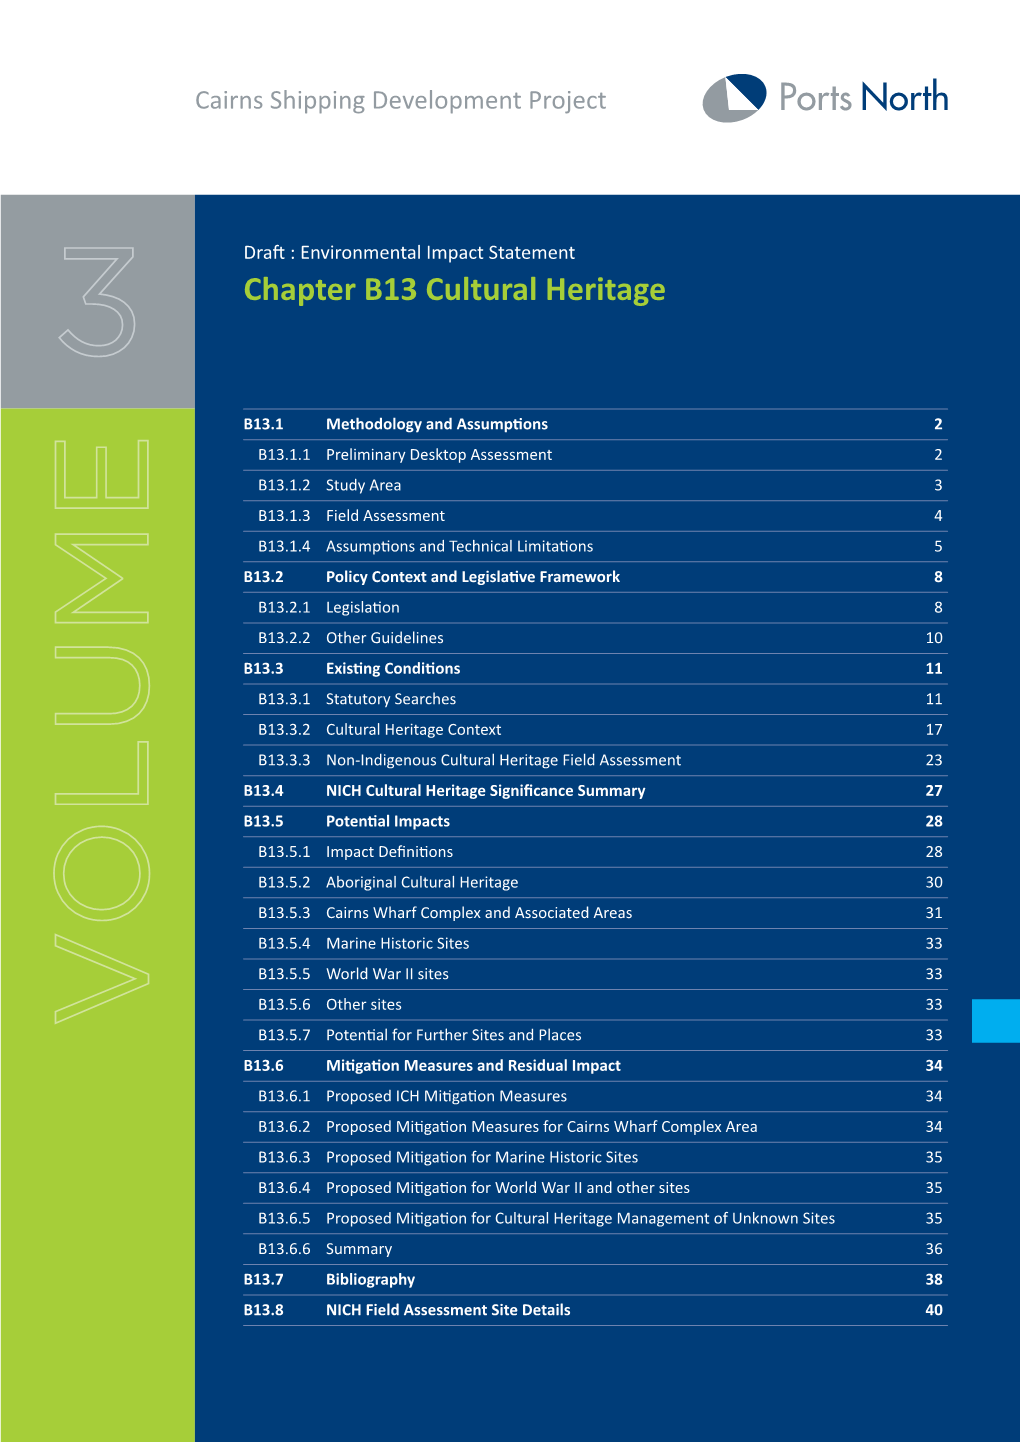 Chapter B13 Cultural Heritage